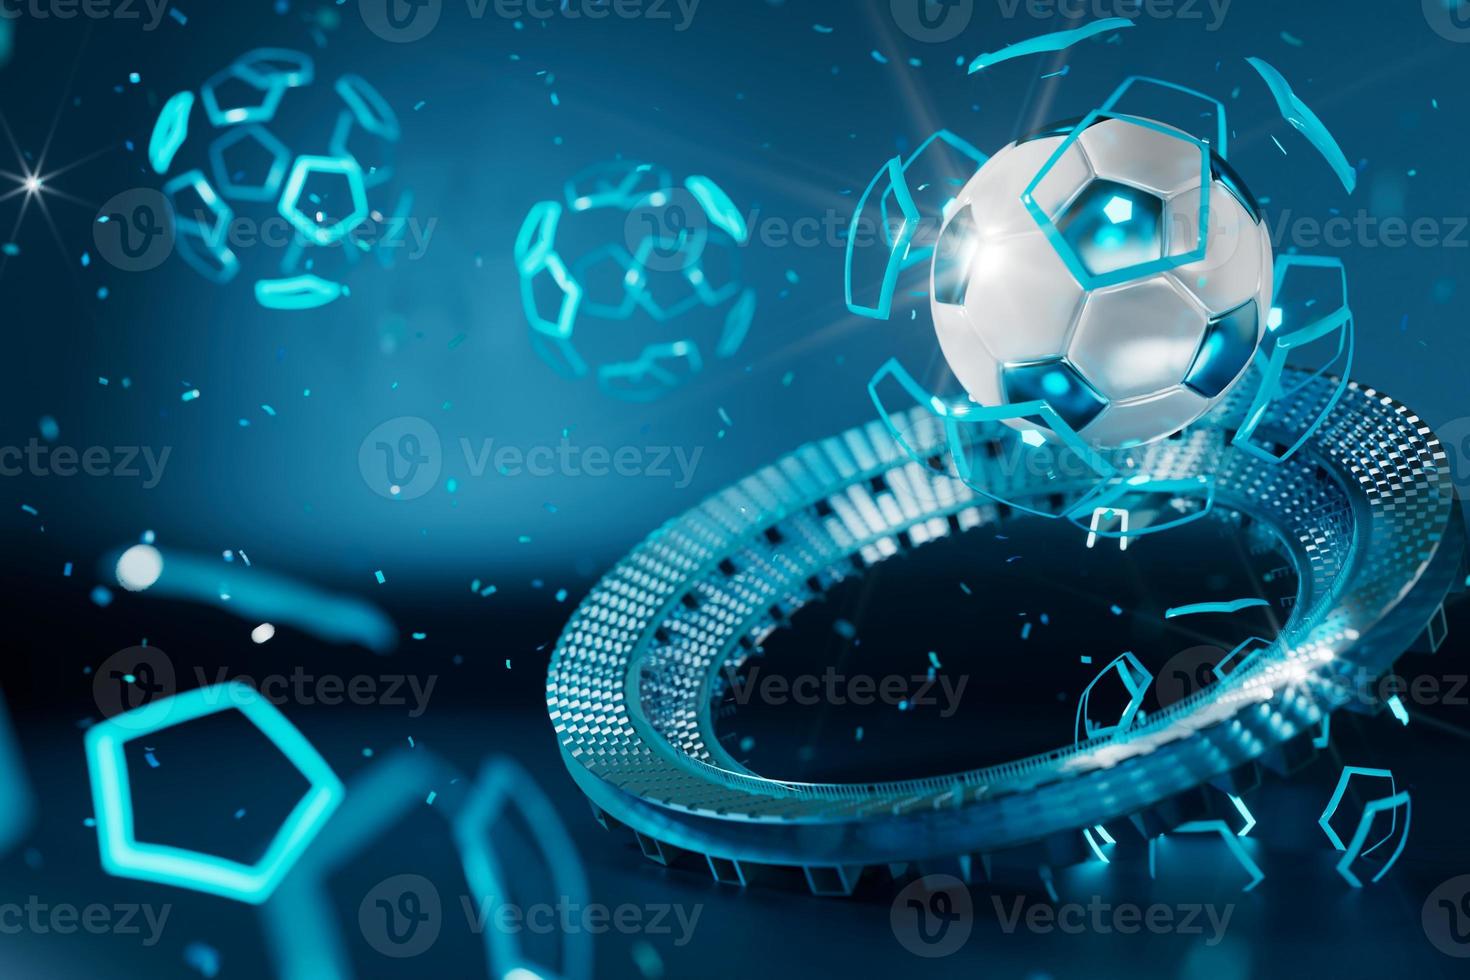 football 3d object in the abstract background, arena concept design, copy space, 3d illustration, glow neon light text frame, 3d rendering element, soccer game sport, sports equipment, realistic ball photo